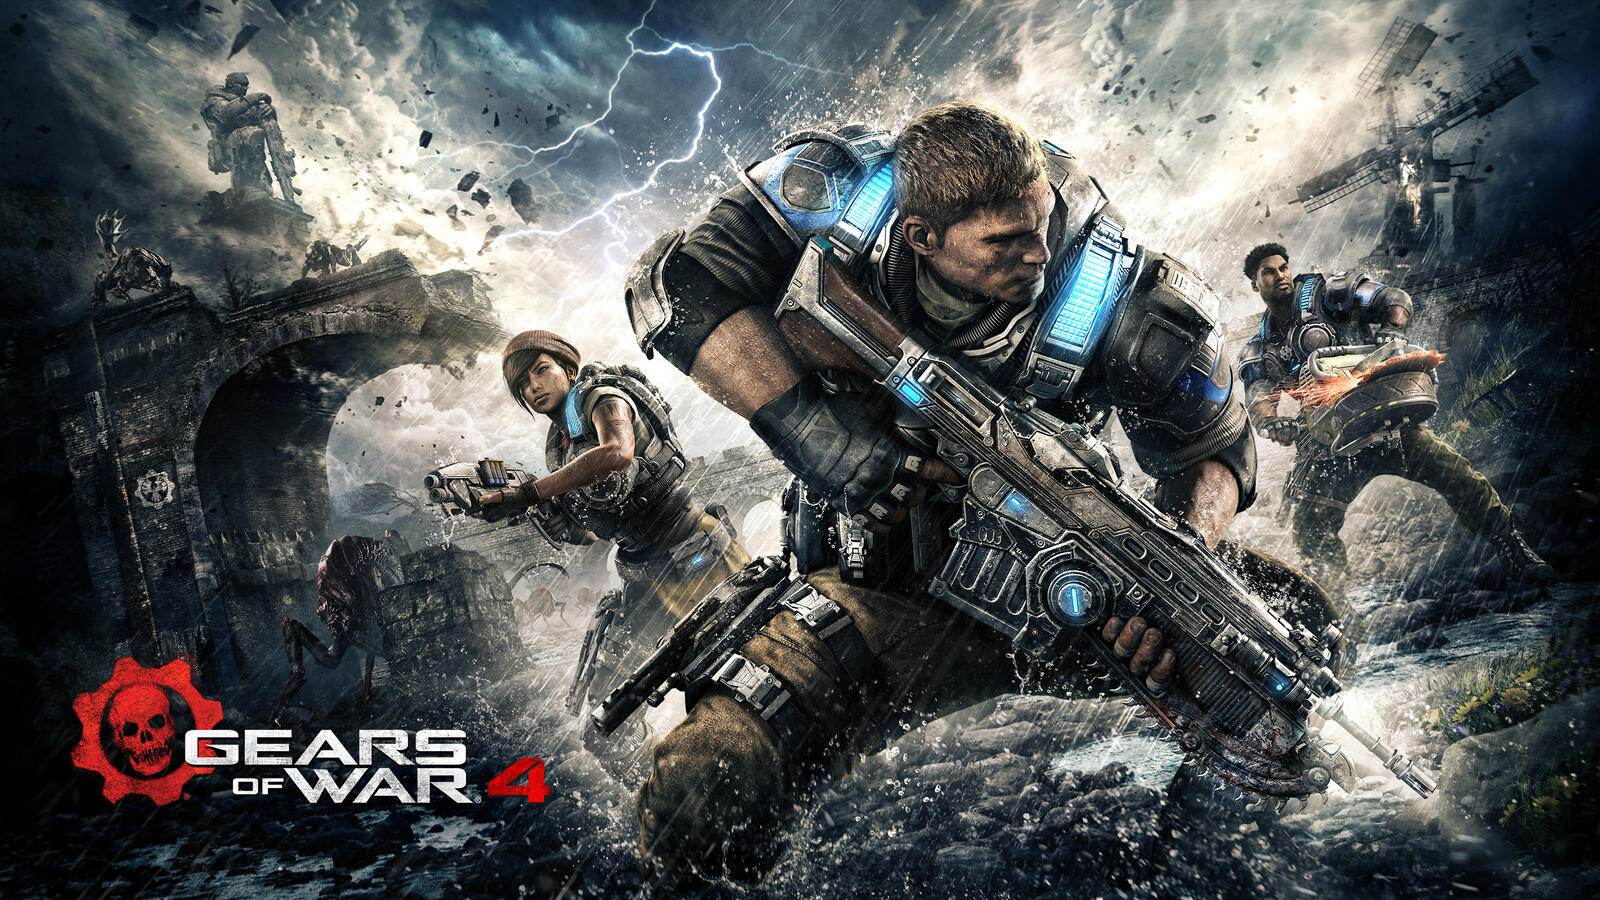 Wallpapers gears of war 4 boi Xbox games on the desktop